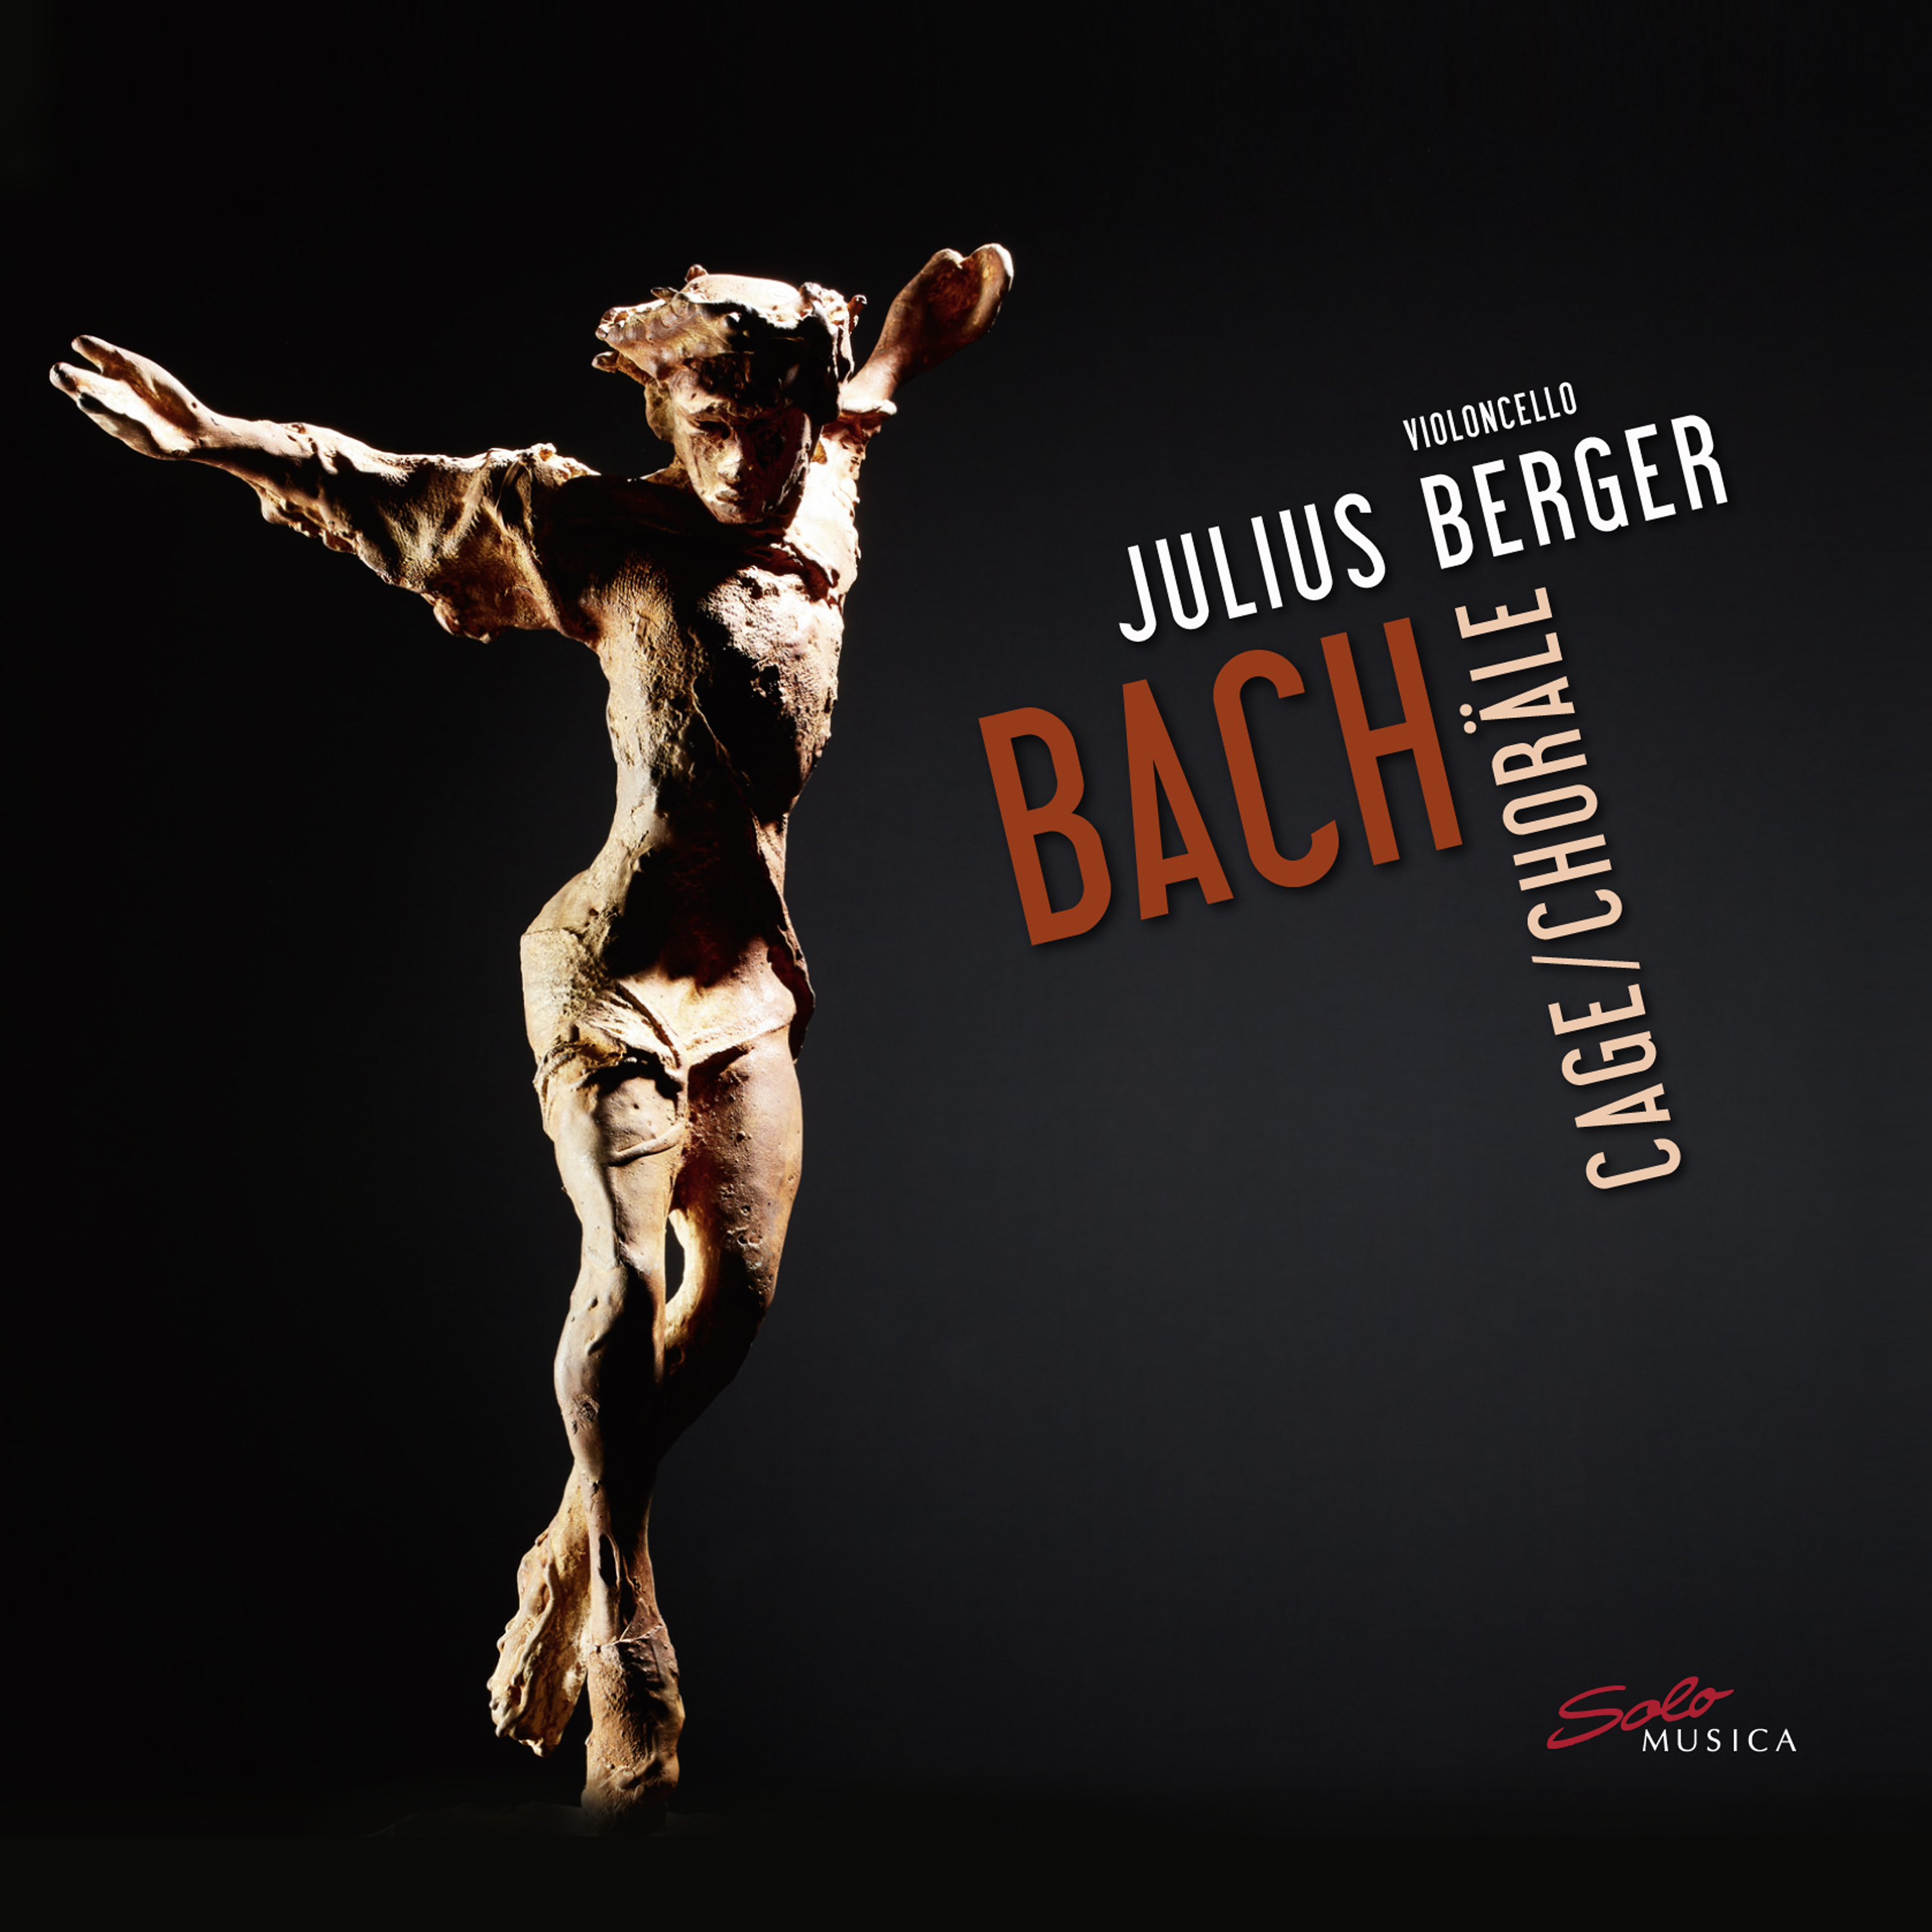 bach_berger4260123642709_Frontcover_Physical_and_Digital